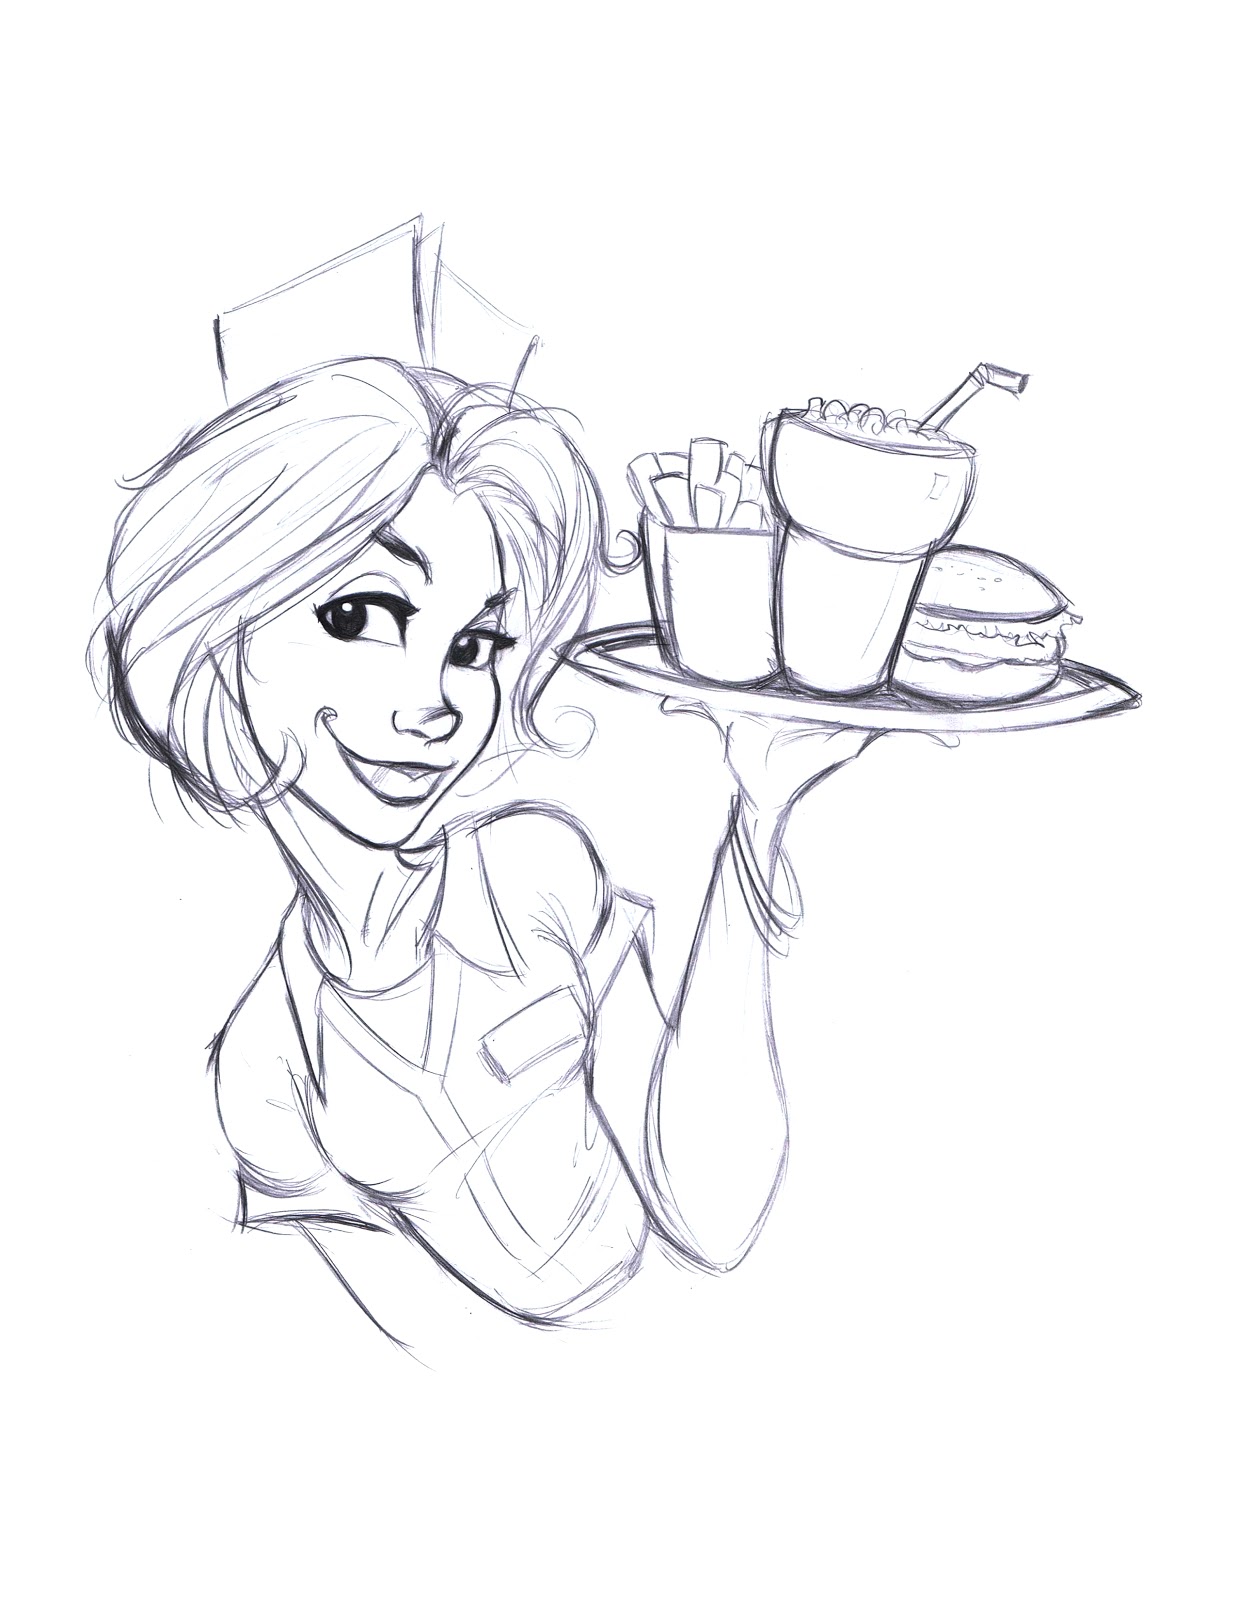 TALI'S DINER: Waitress sketch and colors